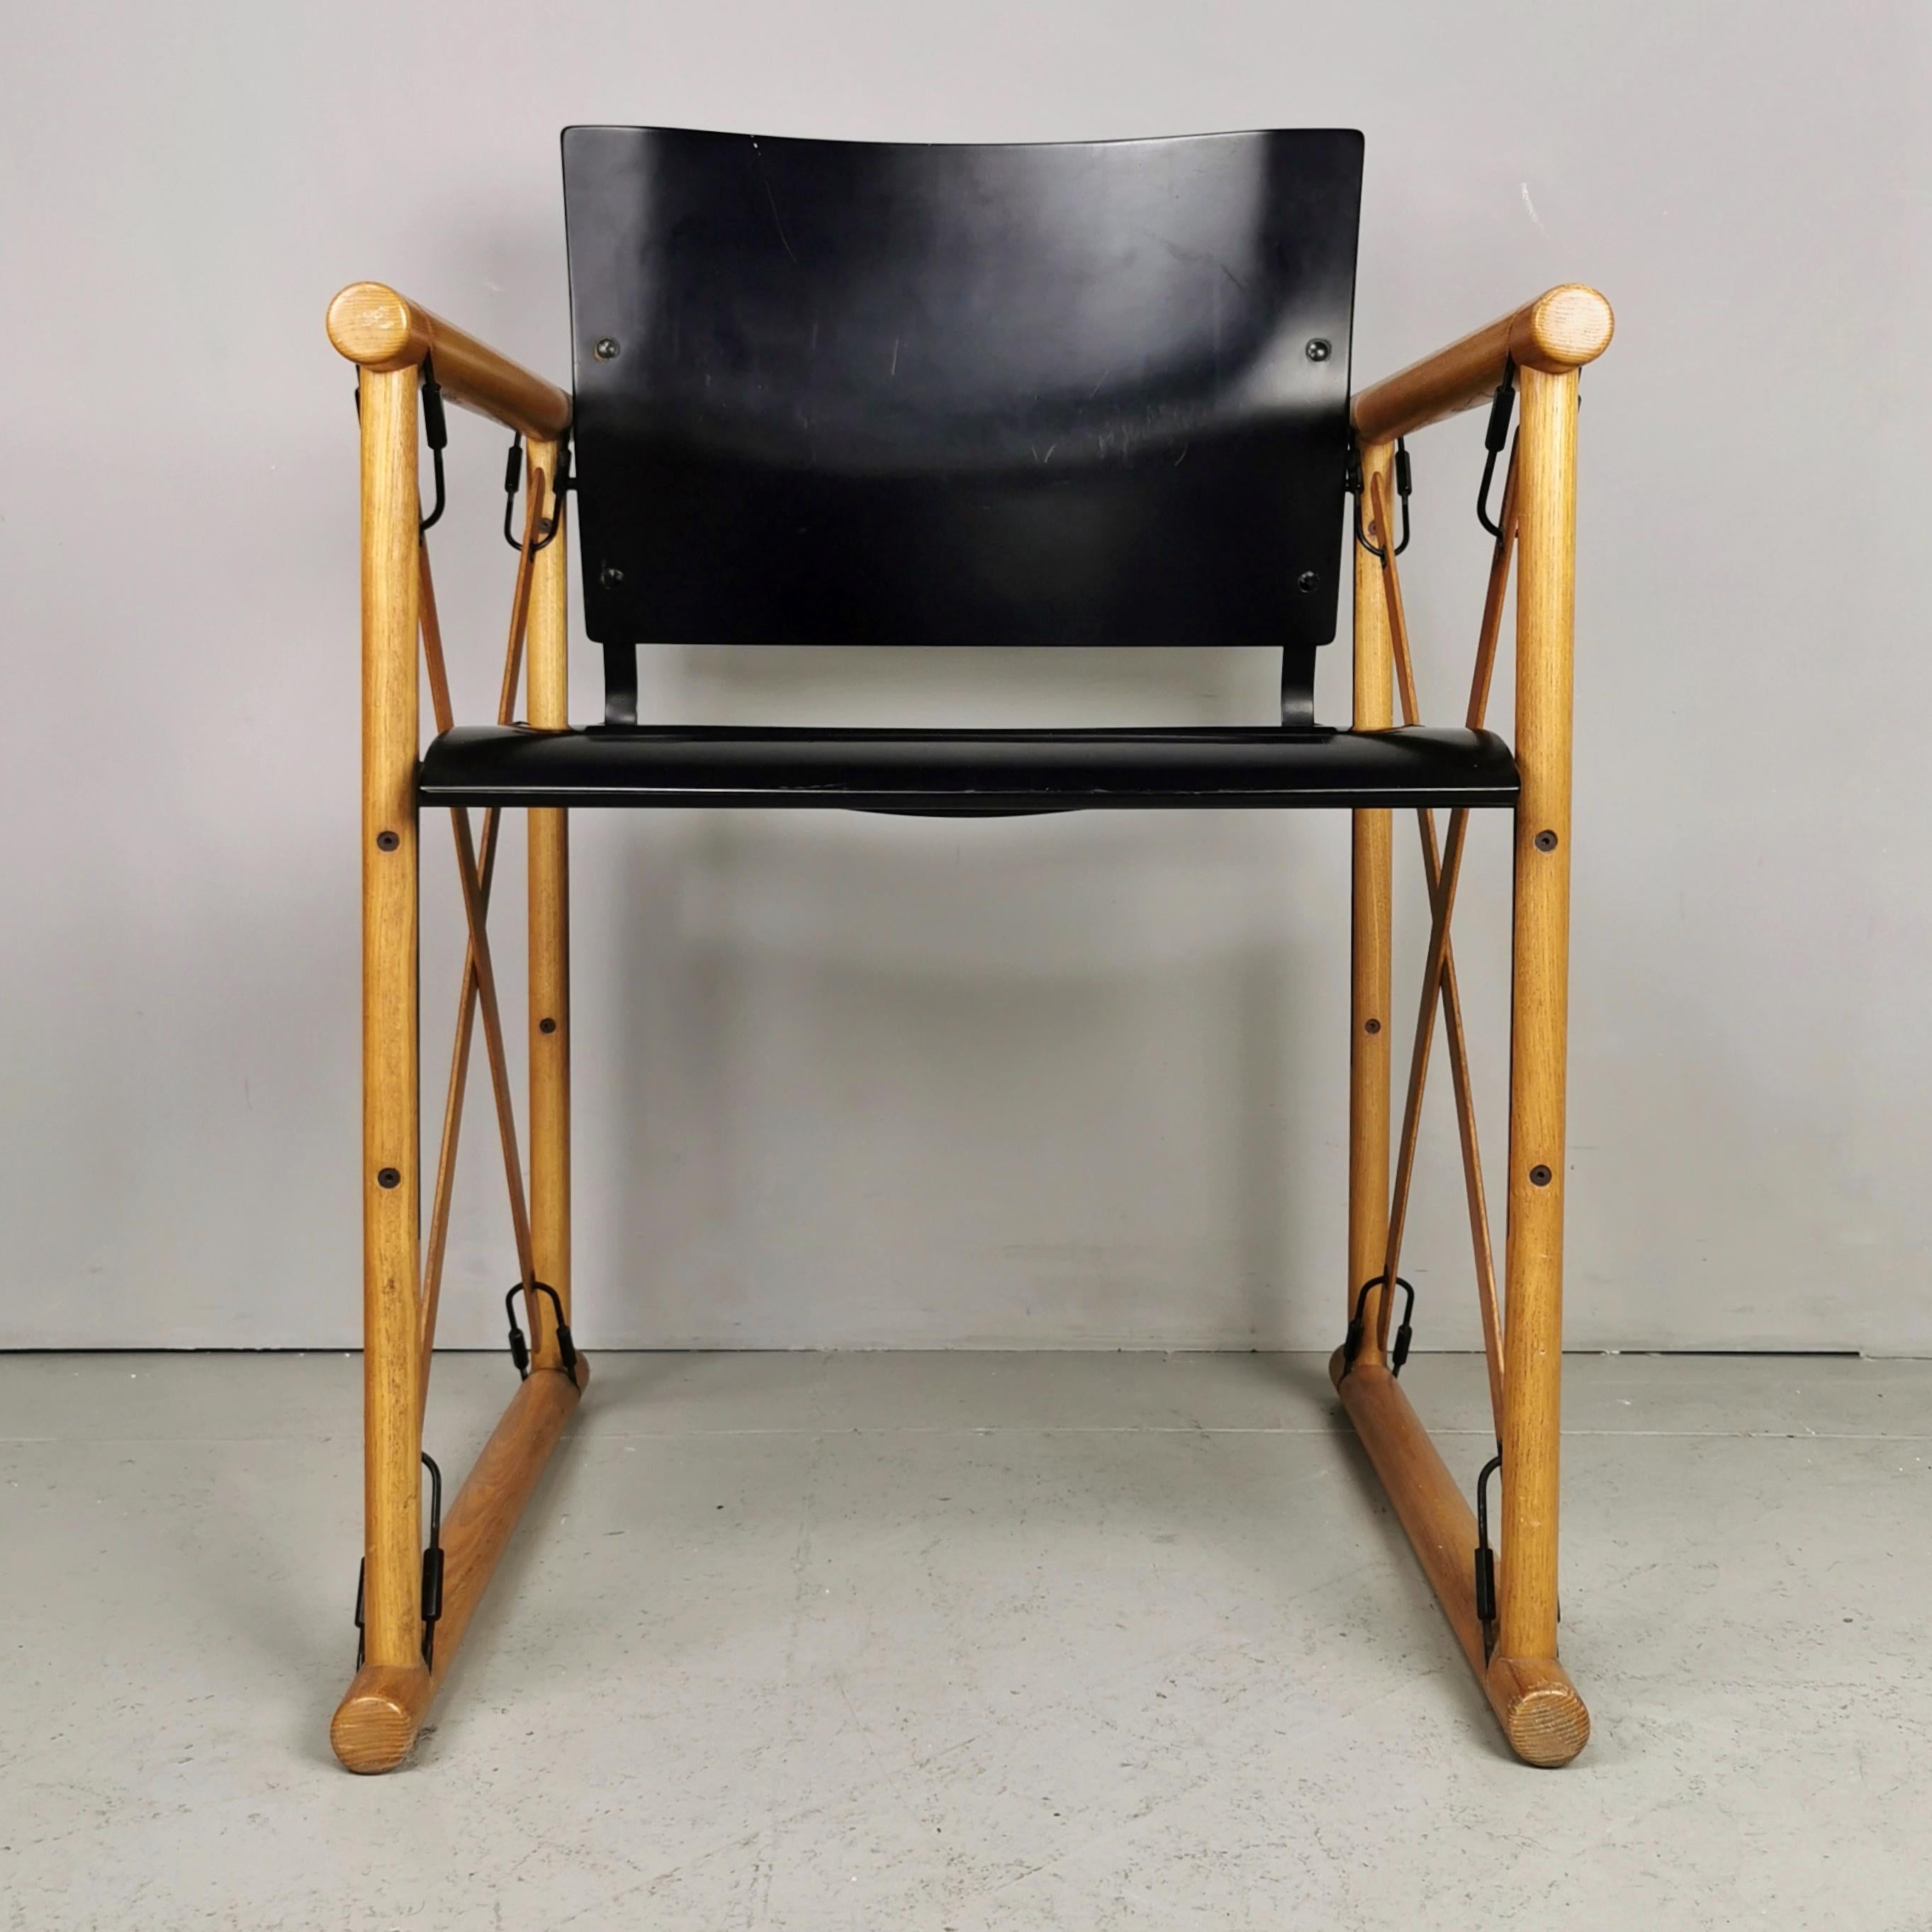 Rare 1970s set of Chairs with light wood frame with black lacquered bentwood seat and back. The special structure with black metal inserts make them suitable for any environment. The chairs are in excellent condition.